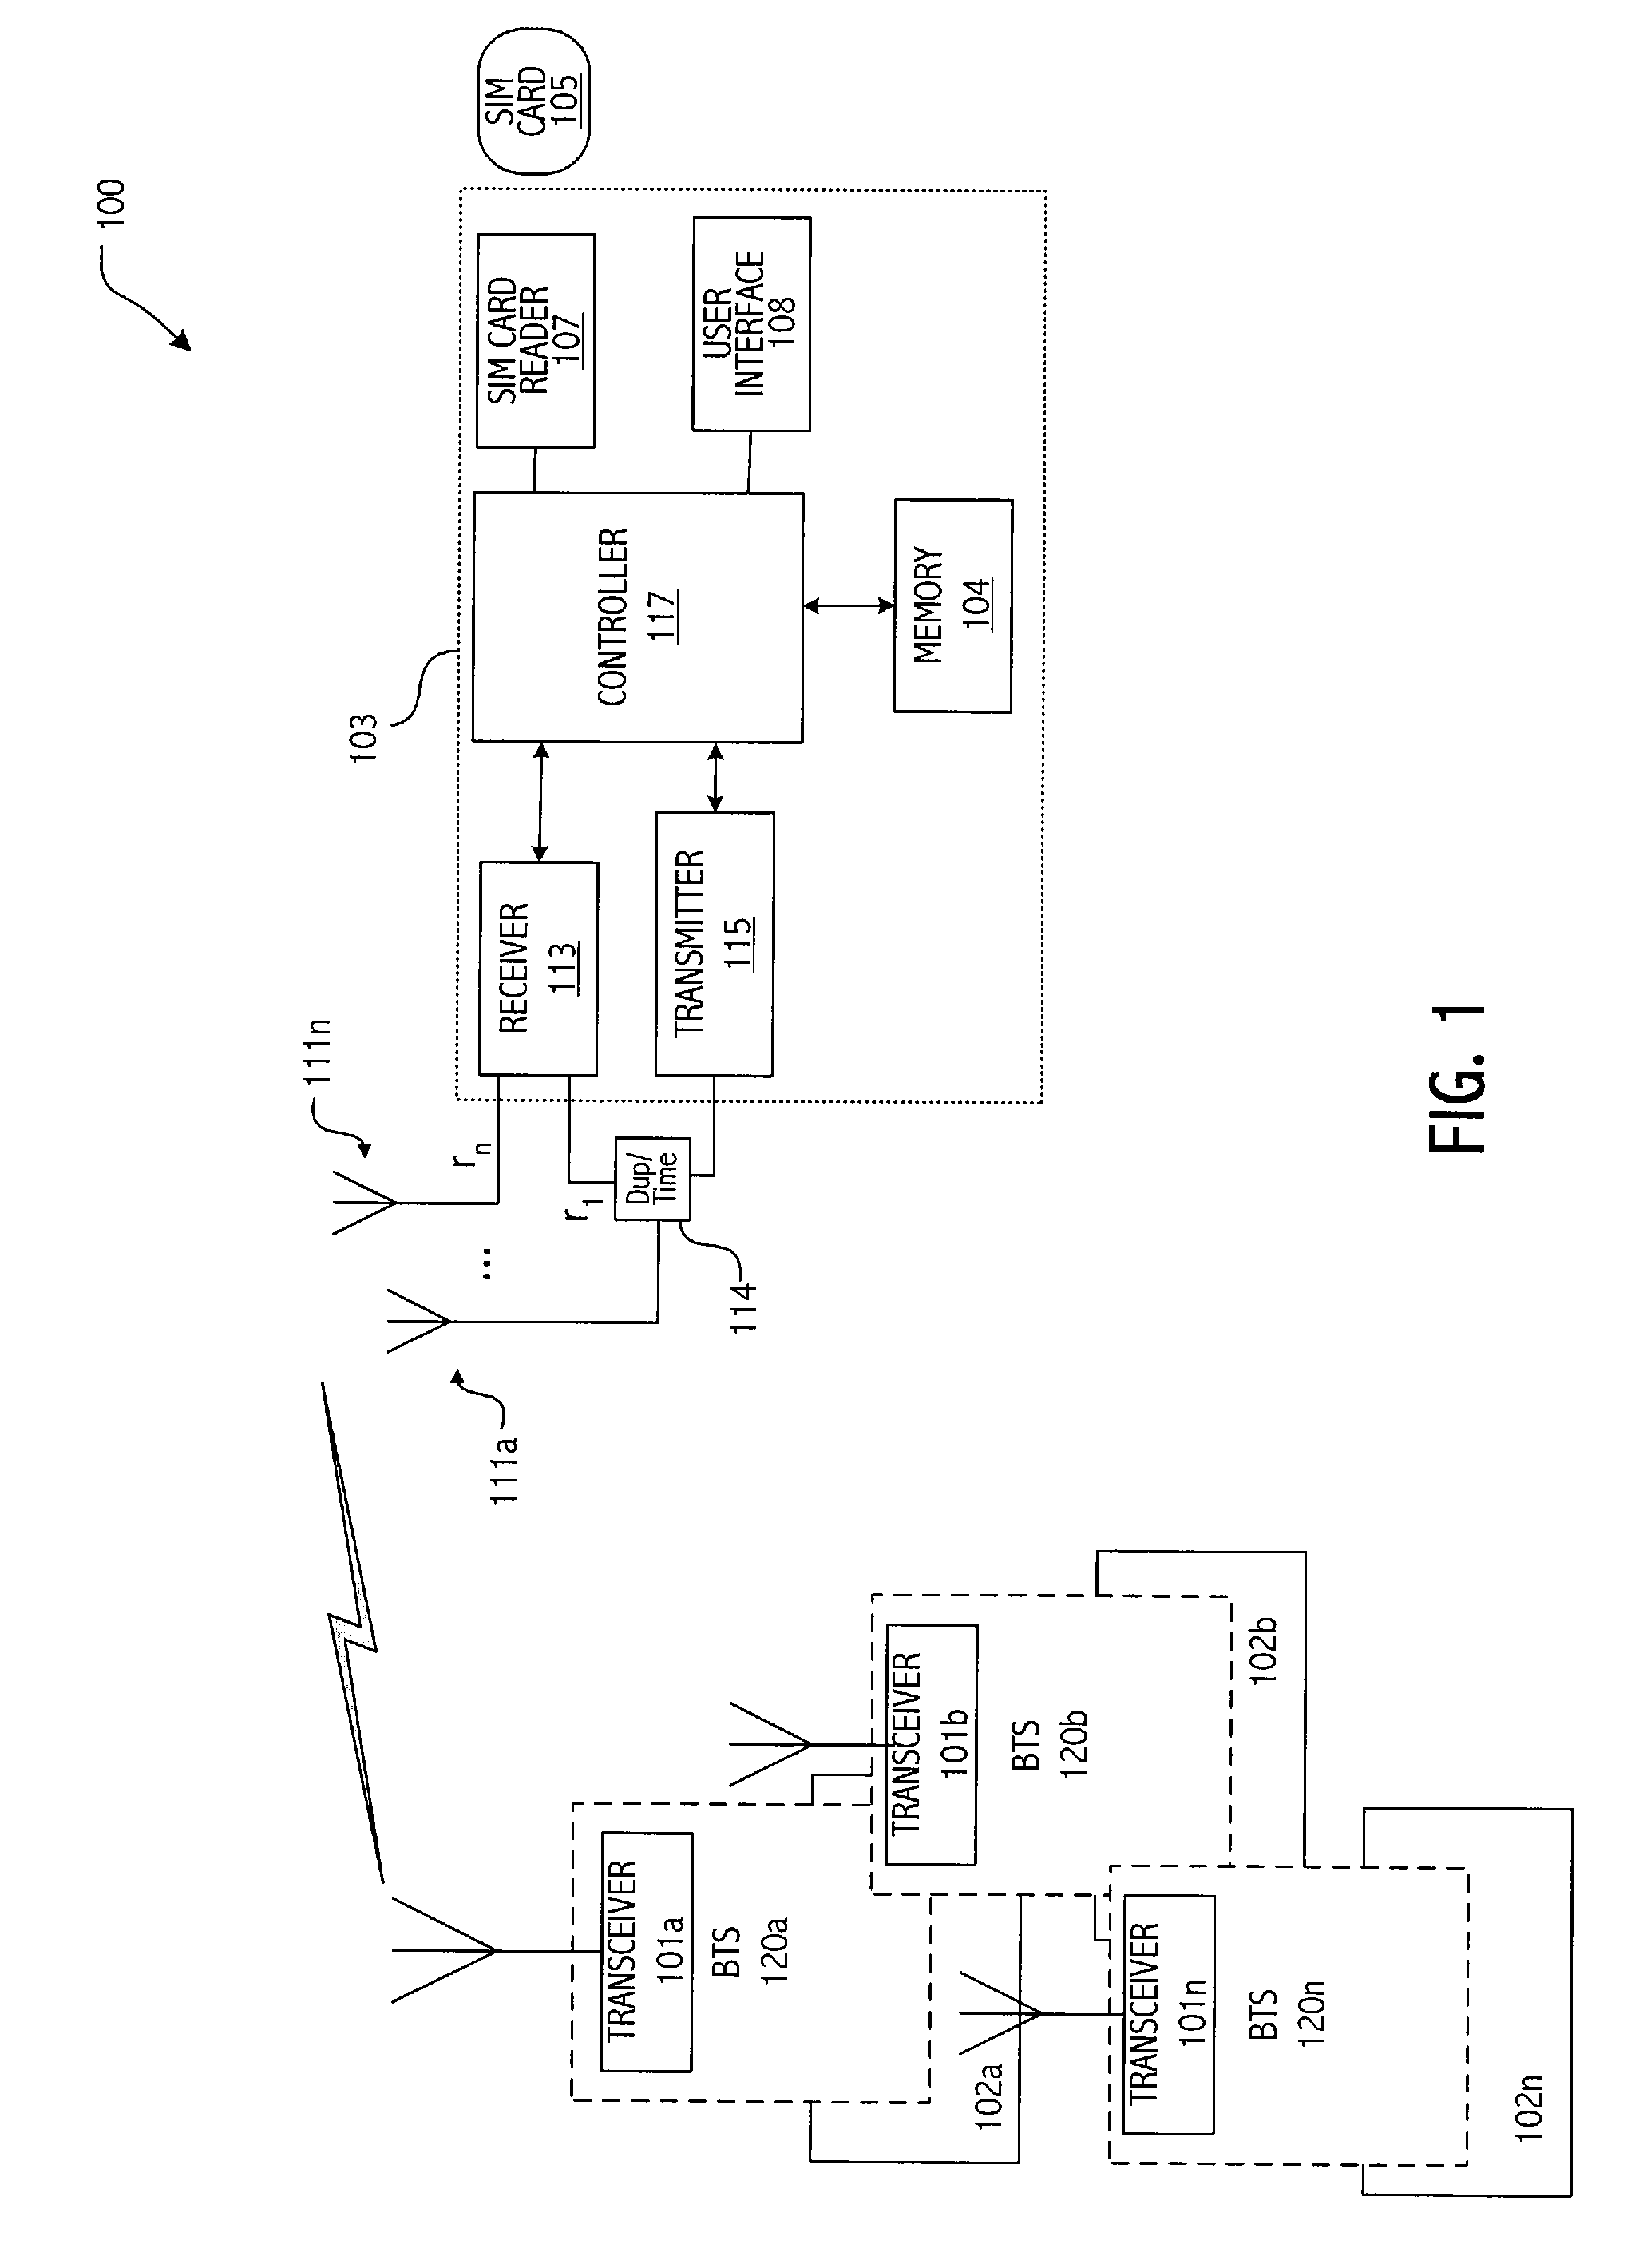 Systems and methods for interference cancellation in a multiple antenna radio receiver system